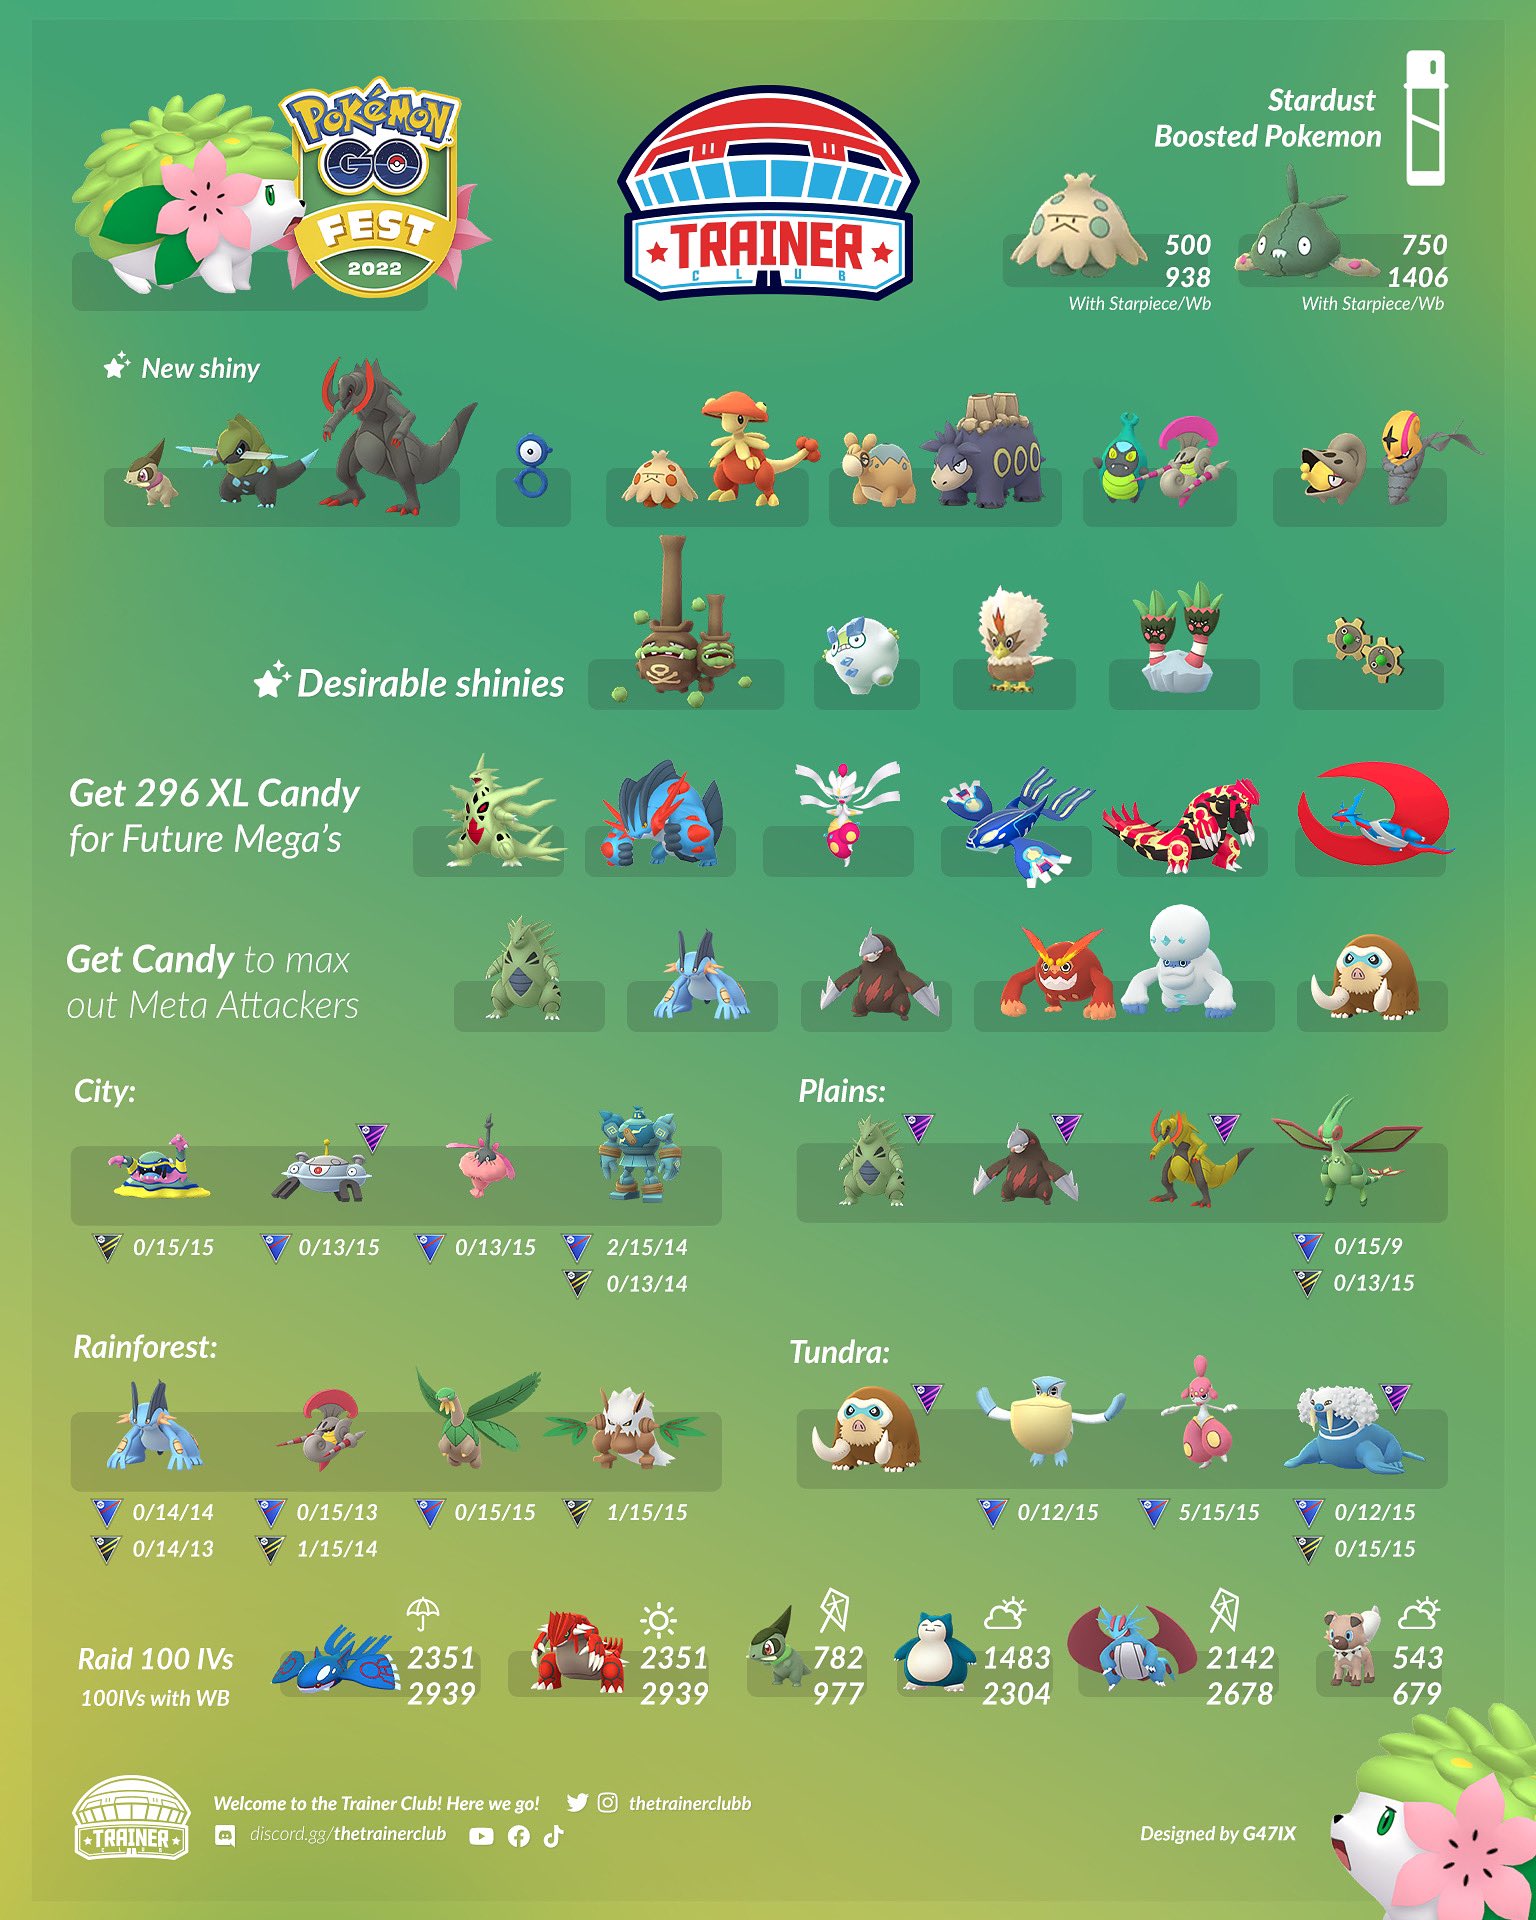 The Trainer Club on X: GO FEST Global Graphic! 🕚 Saturday